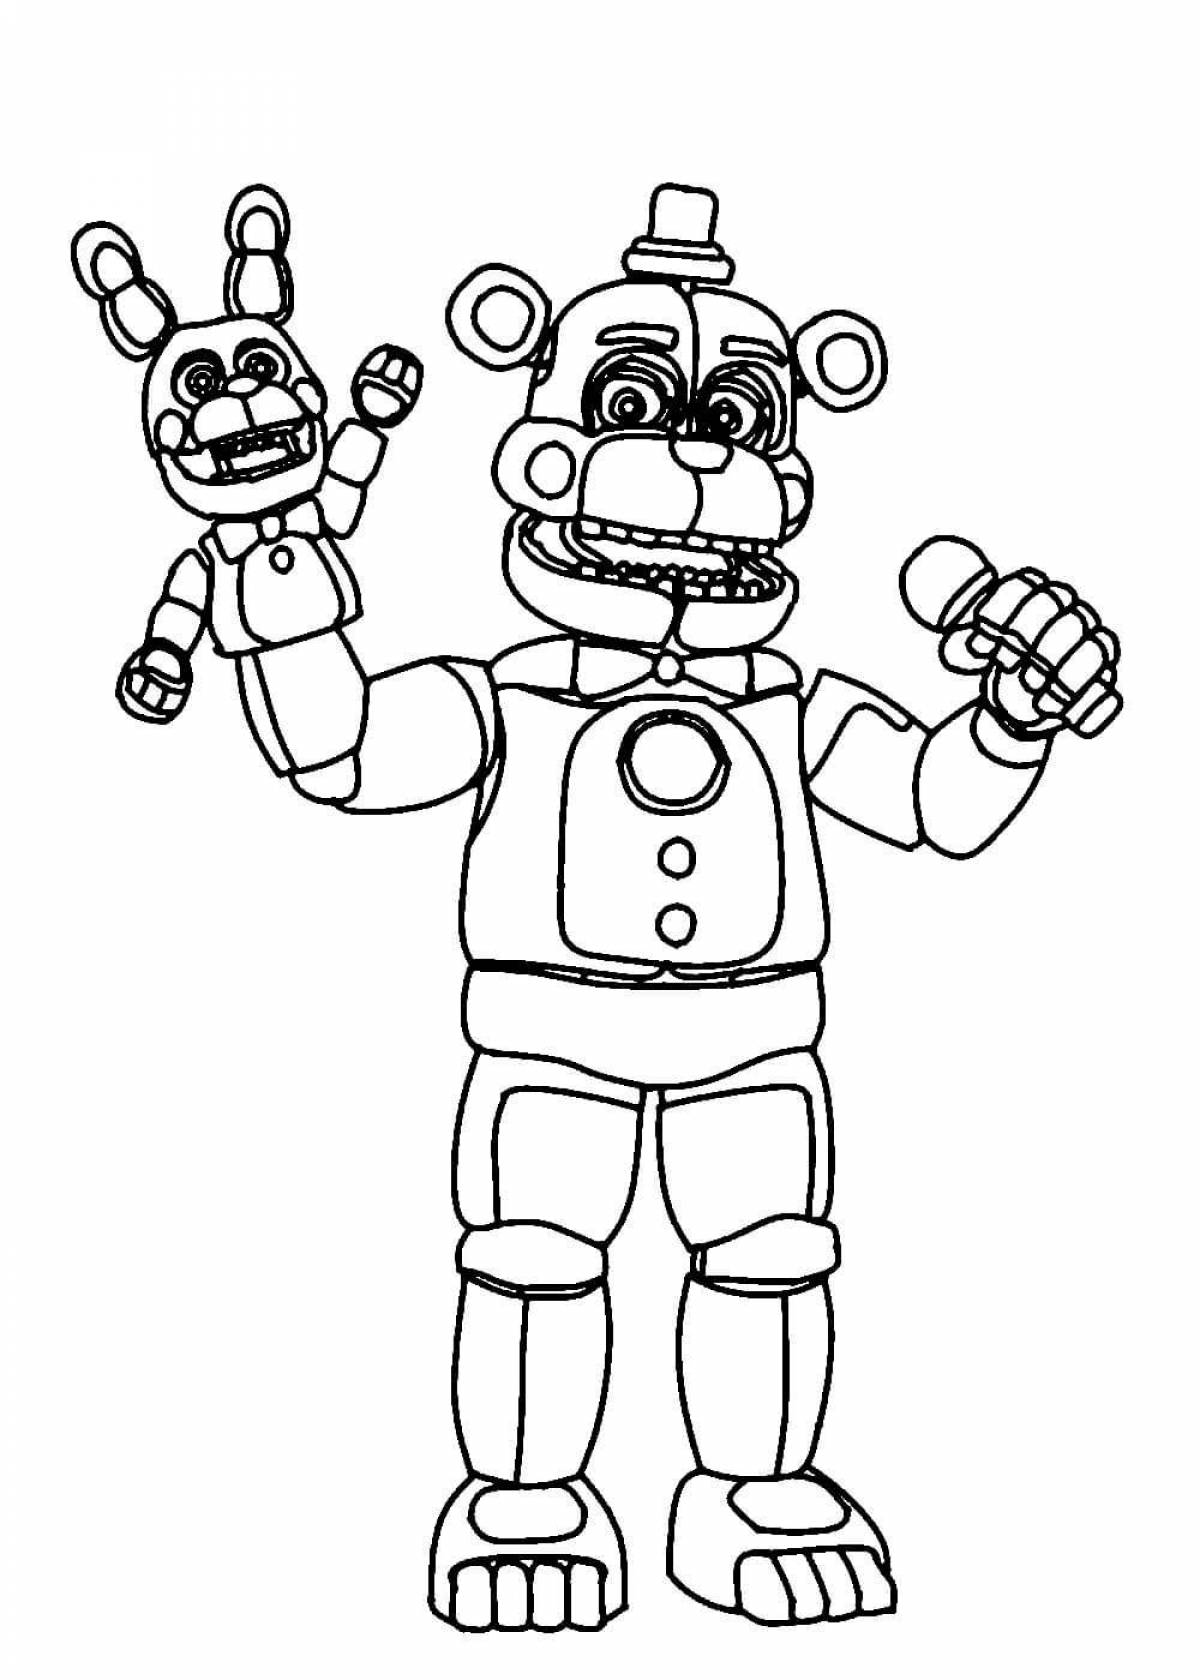 Bright coloring animatronics for kids